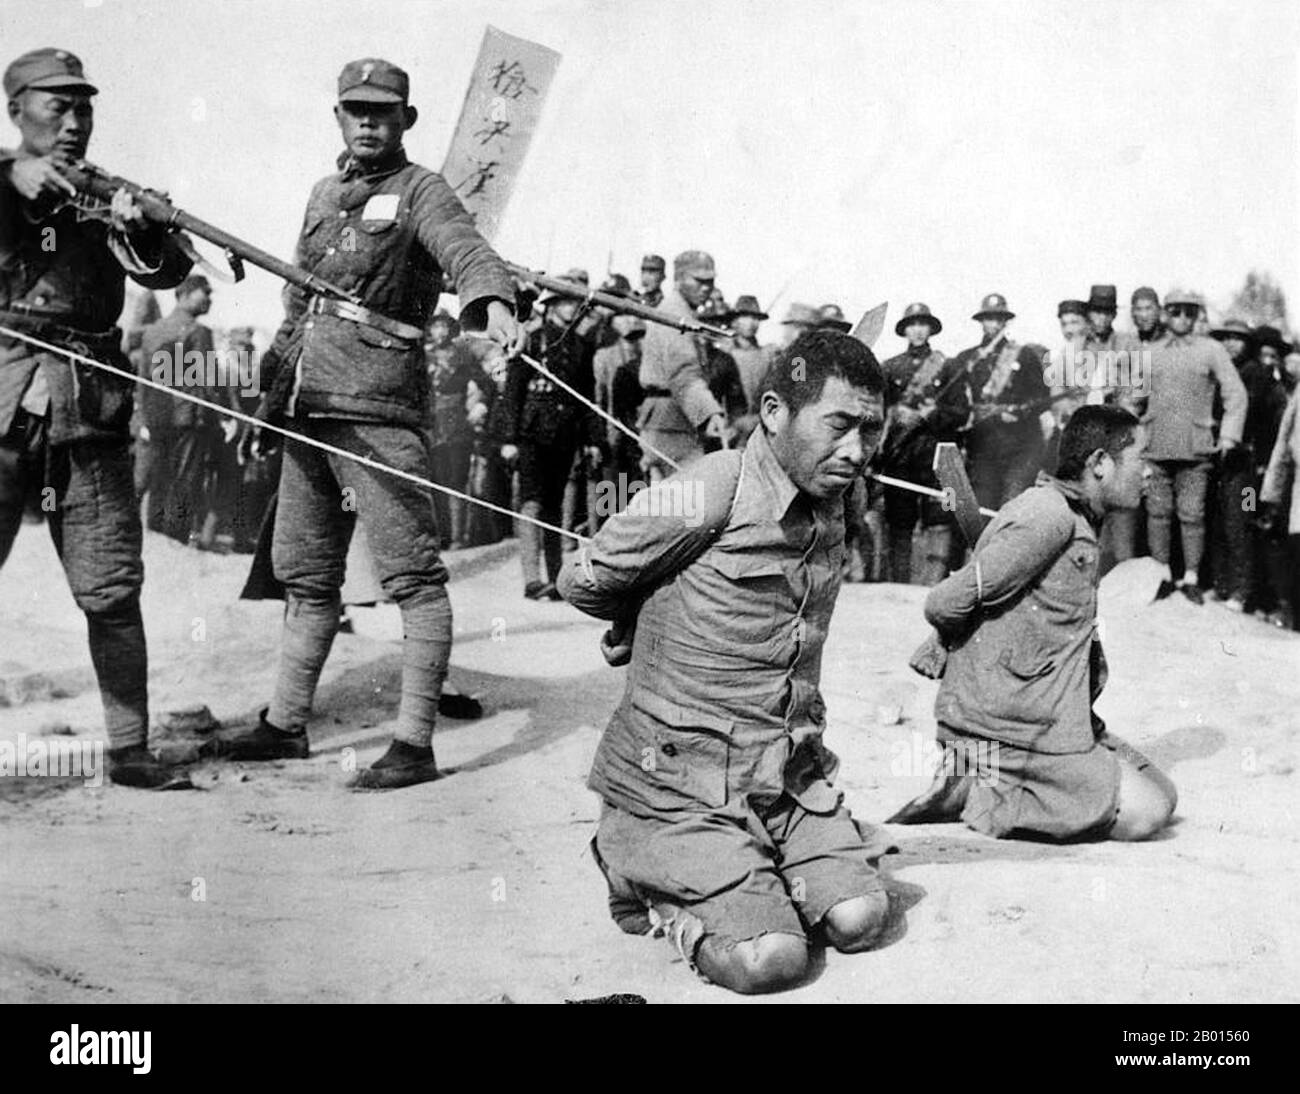 China: Execution of Chinese collaborators by Nationalist troops, Shanghai, 1937. Second Sino-Japanese War (July 7, 1937 – September 9, 1945).  The Second Sino-Japanese War was a military conflict fought primarily between the Republic of China and the Empire of Japan. After the Japanese attack on Pearl Harbor, the war merged into the greater conflict of World War II as a major front of what is broadly known as the Pacific War. Although the two countries had fought intermittently since 1931, total war started in earnest in 1937 and ended only with the surrender of Japan in 1945. Stock Photo